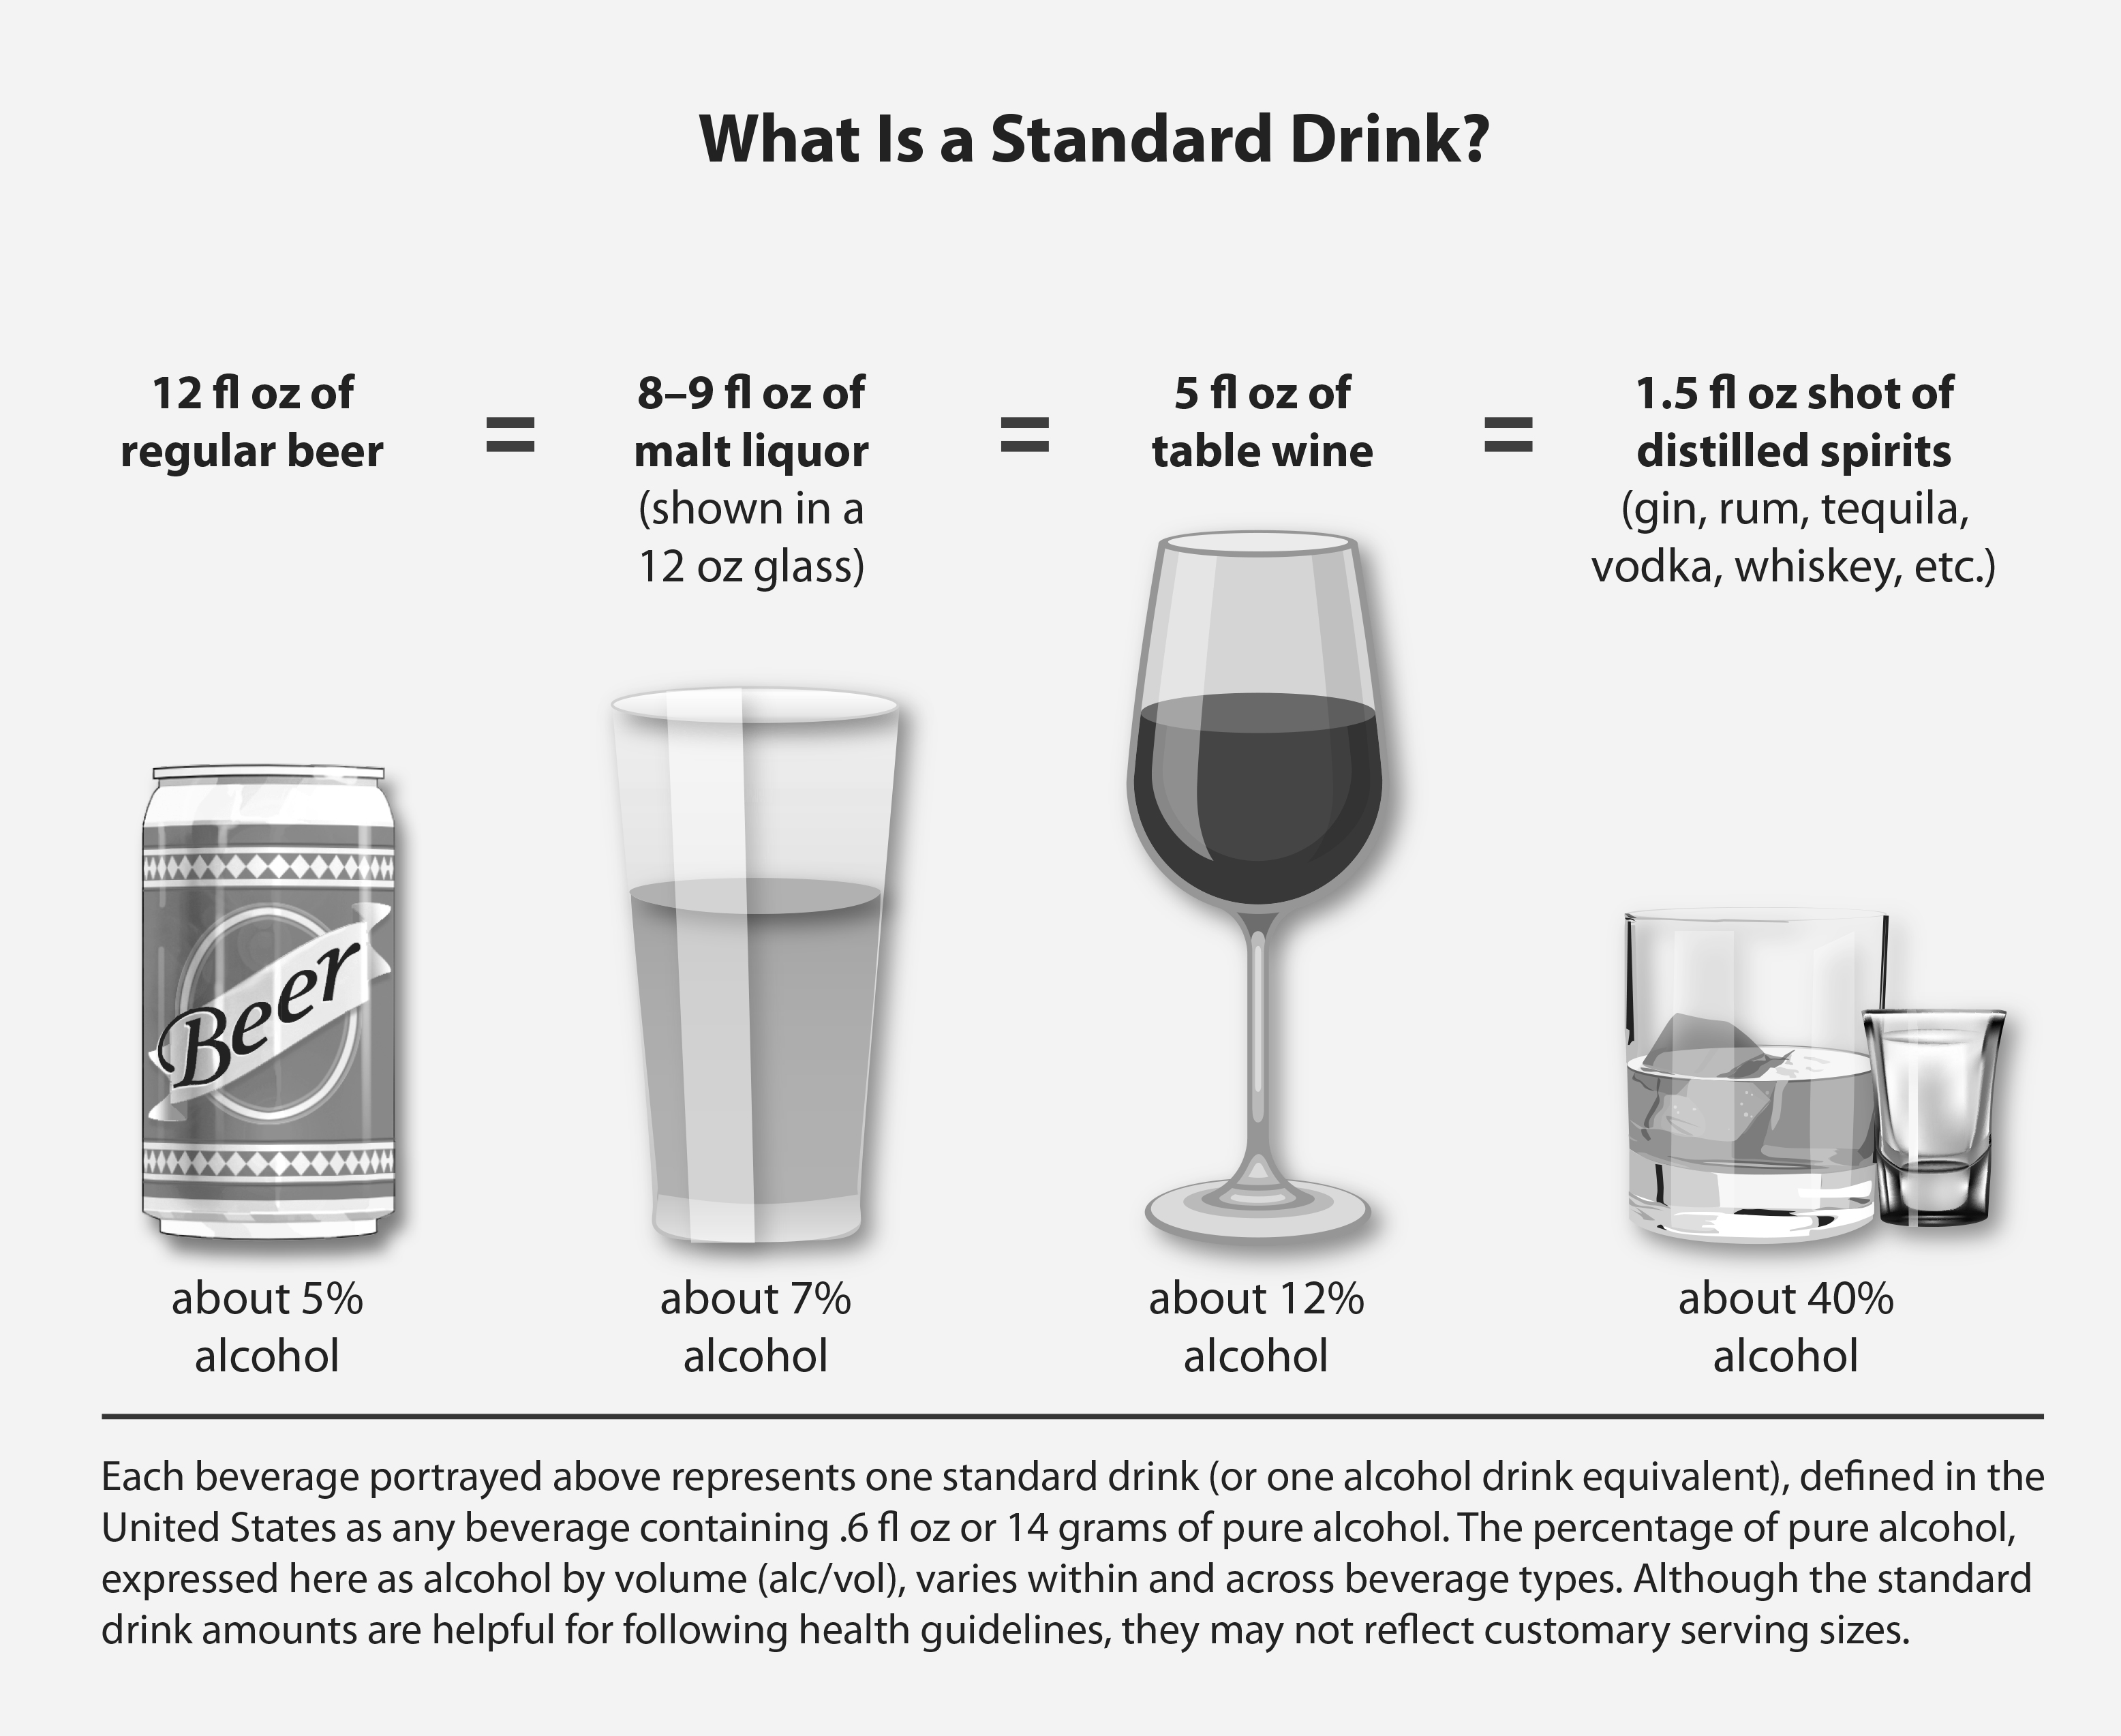 alcohol ounces beverage foundations niaaa ounce alcoholic fluid equivalent percentage amount equals states regular alcoholism liquid dependency substance consumption nih